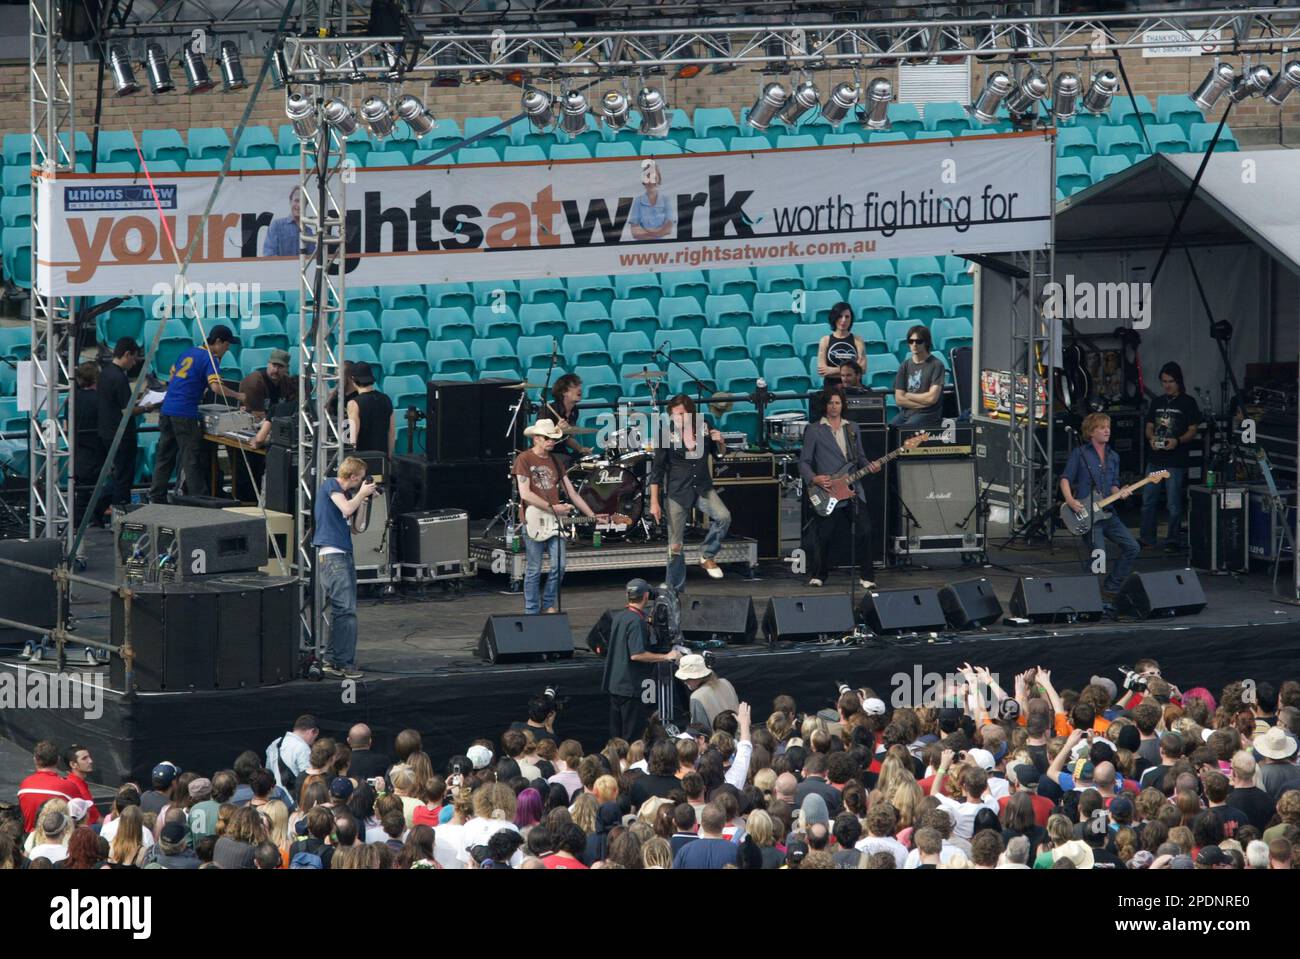 The Beasts of Bourbon performing at the Rockin’ 4 Rights concert at Sydney Cricket Ground protesting the Liberal (conservative) government’s Industrial Relations policies and changes to workplace laws. A protest march through the streets of Sydney’s city centre preceded the concert. Sydney, Australia. 22.04.07. Stock Photo